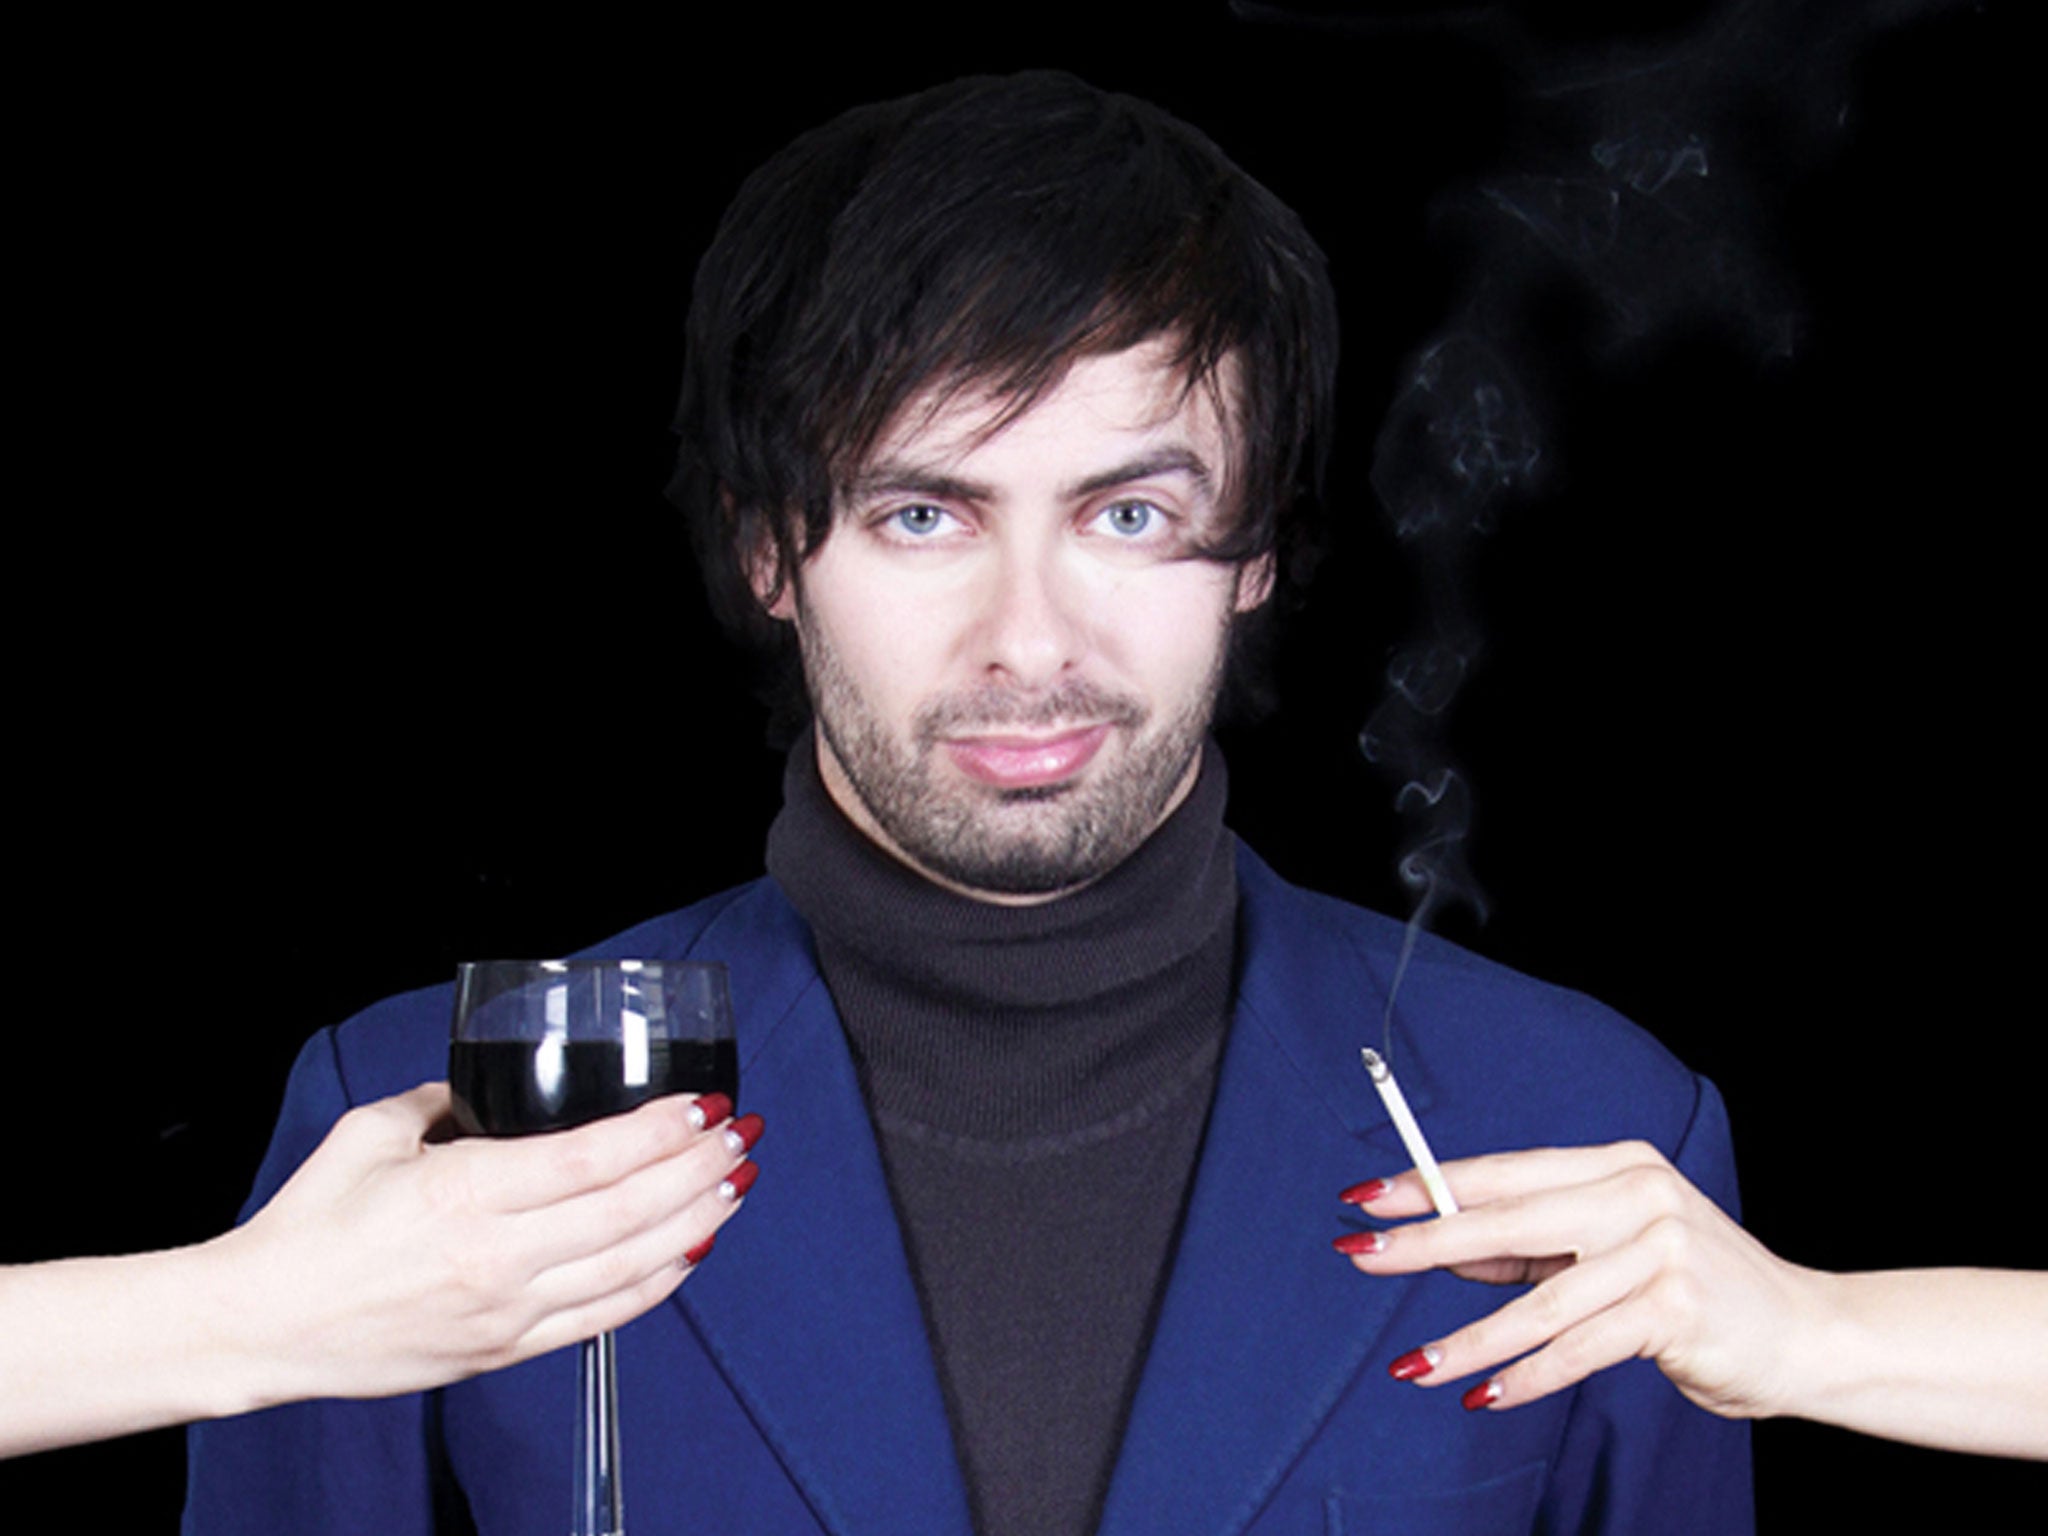 One review of Alexis Dubus’s show failed to realise that he was playing a character, a French comedian, Marcel Lucont